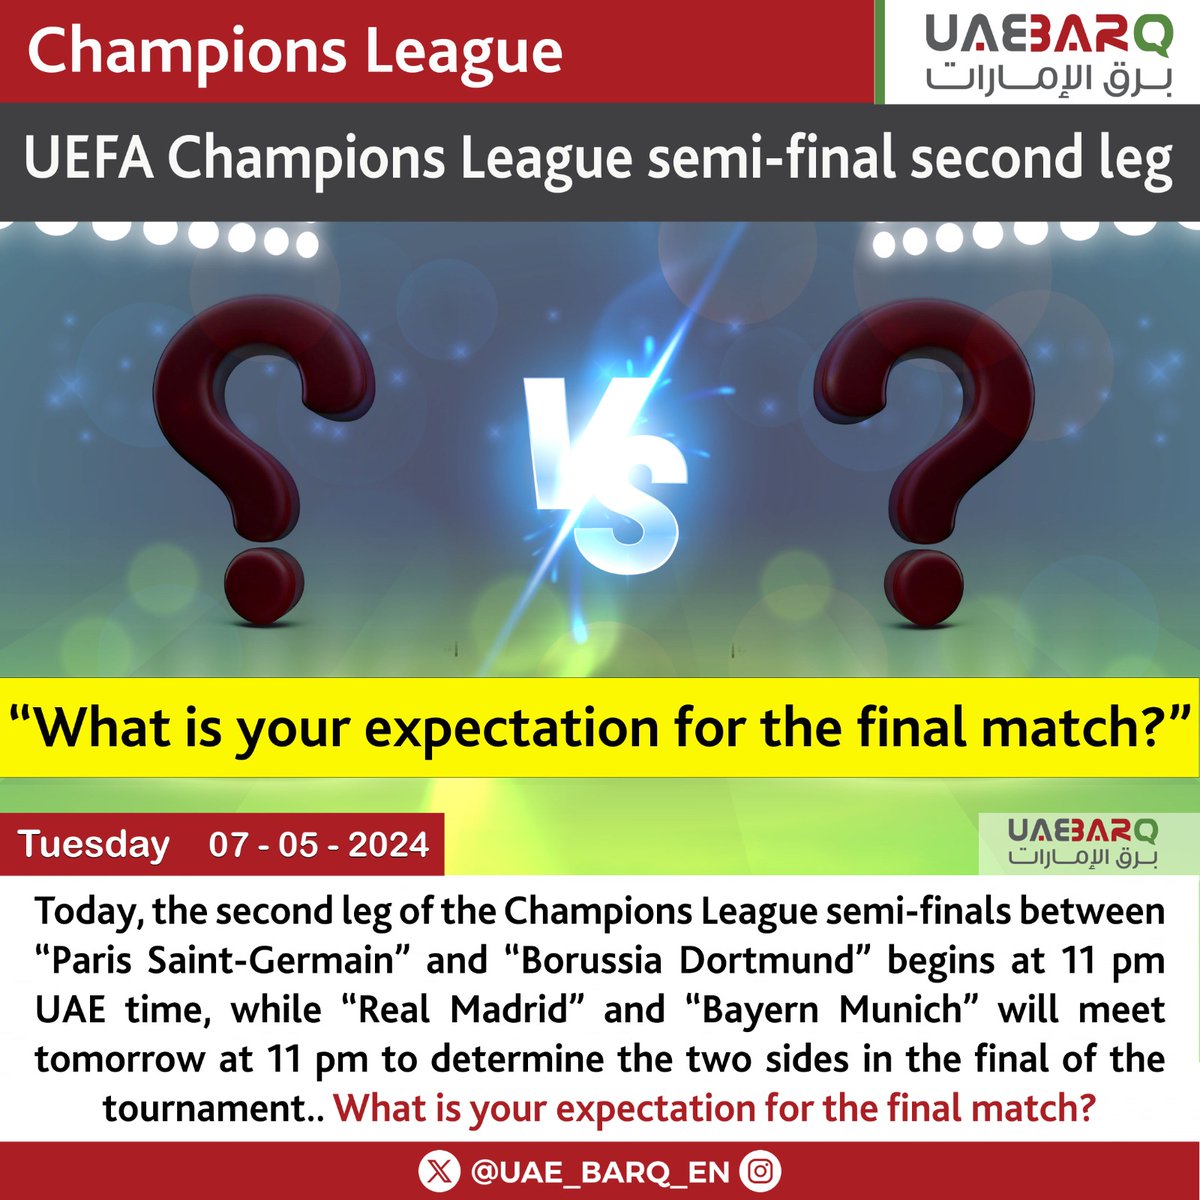 #UEFA Champions League semi-final second leg... “What is your expectation for the final match?” #UAE_BARQ_EN